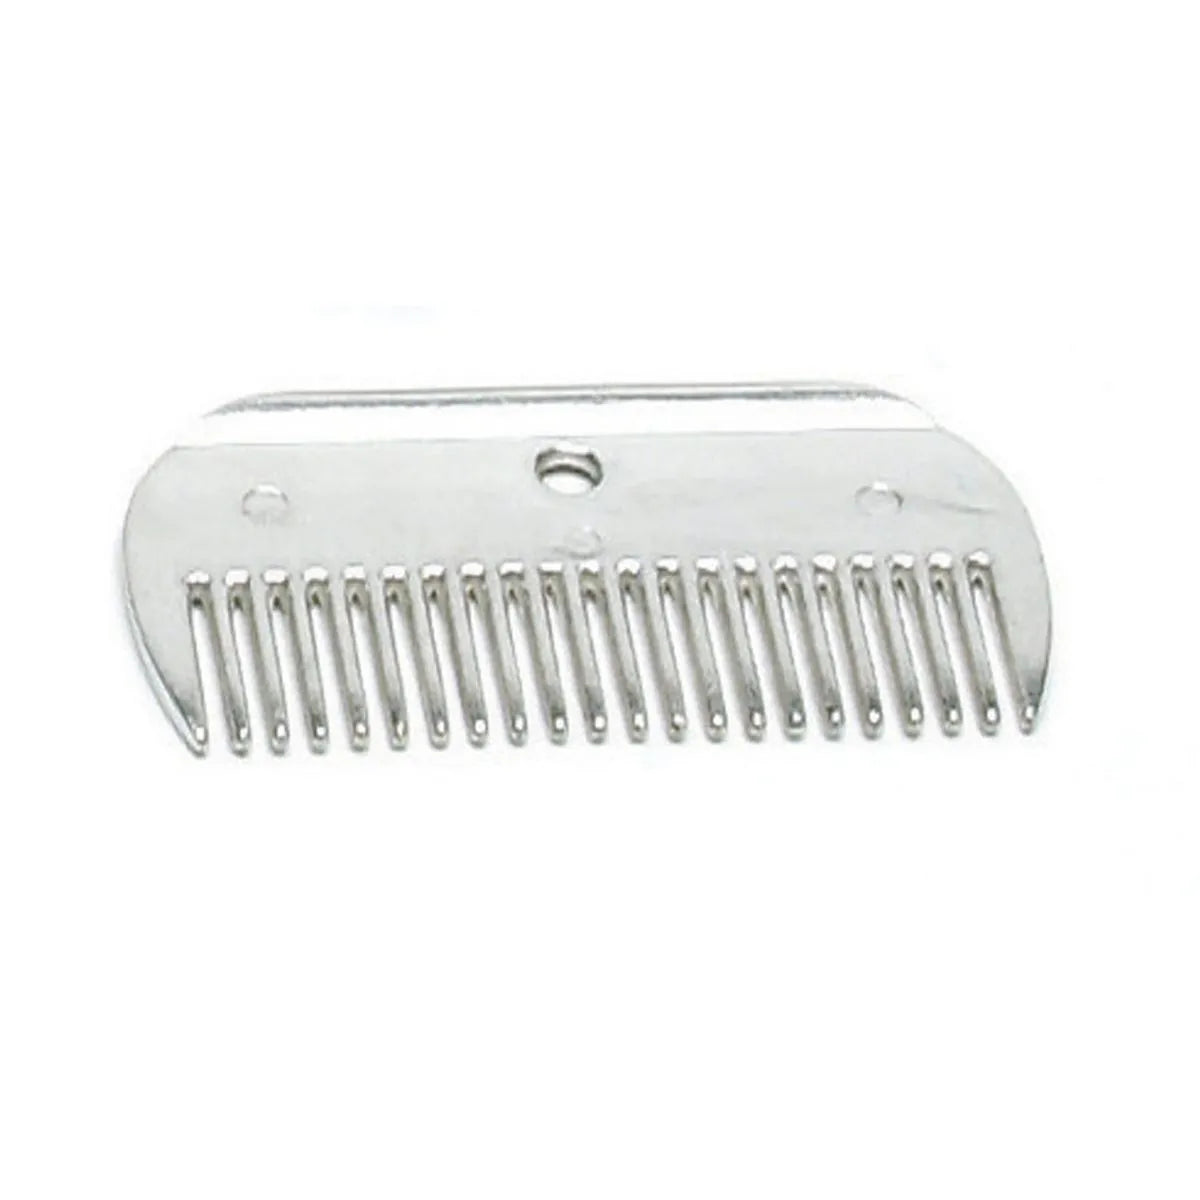 Gee Gee Equine Aluminum Mane Comb for Horse Grooming